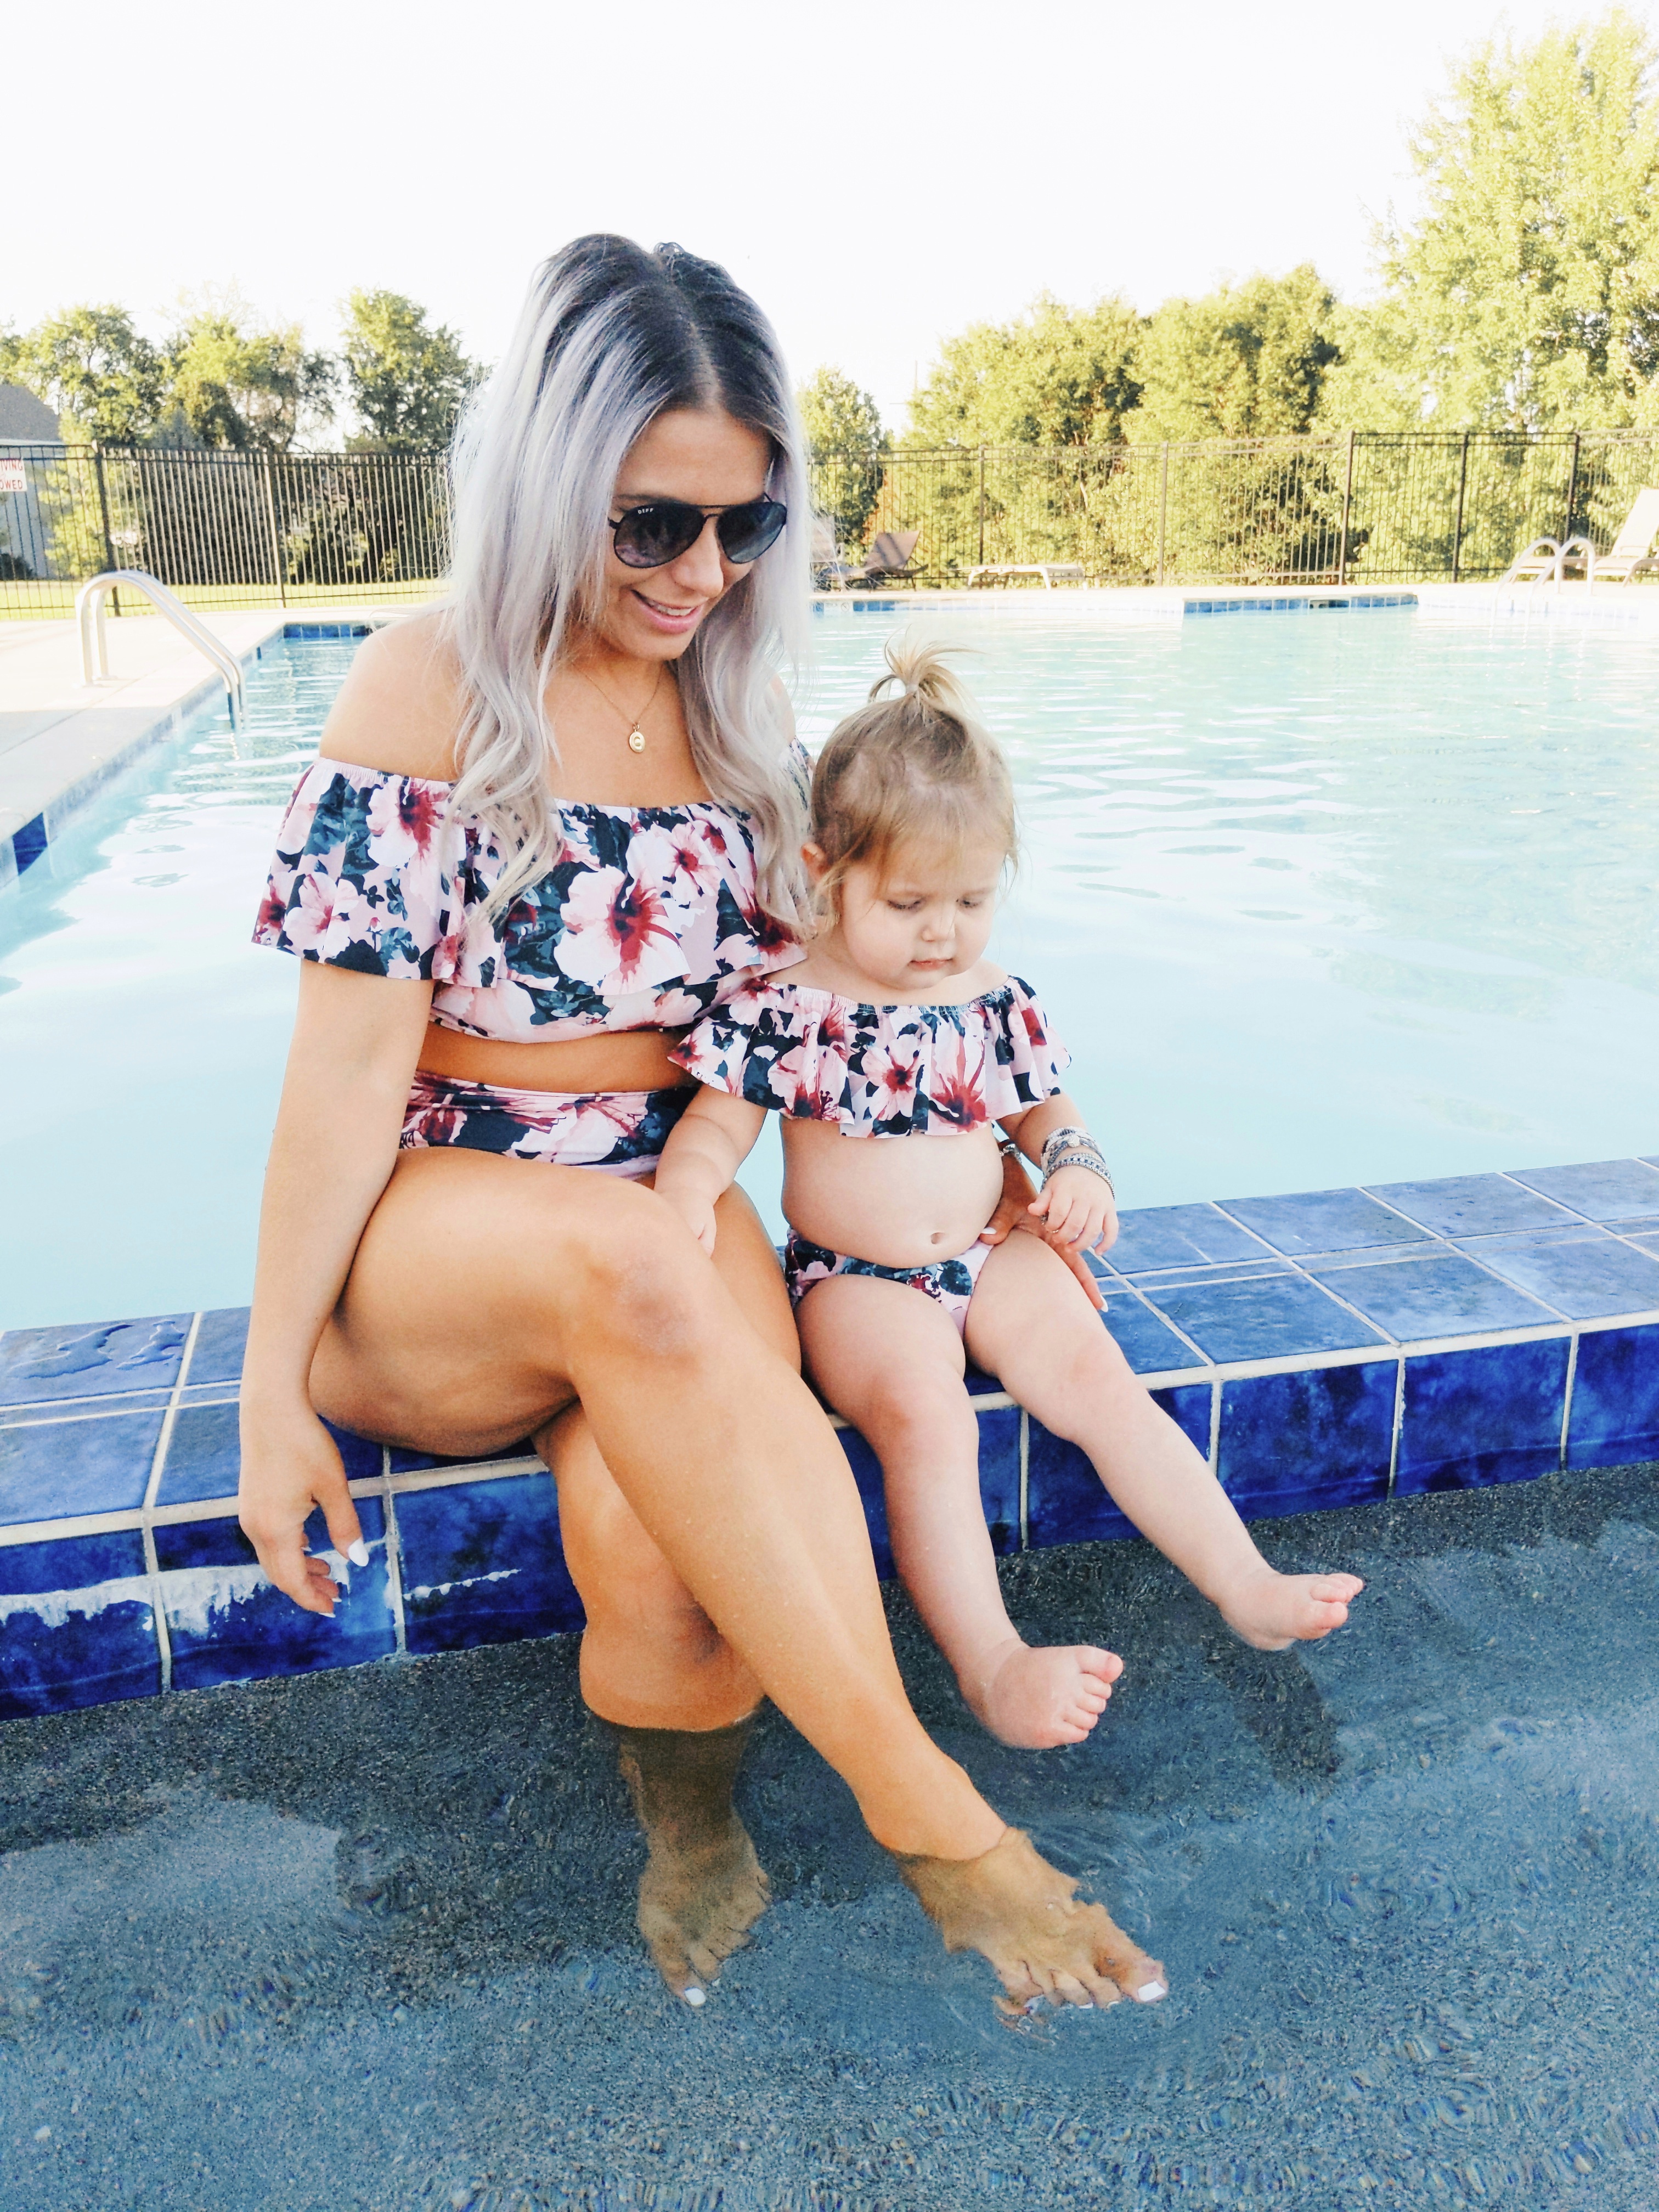 Loved this mama's honest Albion Fit swimsuit reviews! If you're debating if Albion Fit swimsuits are worth it, read this review of cute mommy and me swimsuits from Albion Fit! #mommyandme #twinning #girlmom